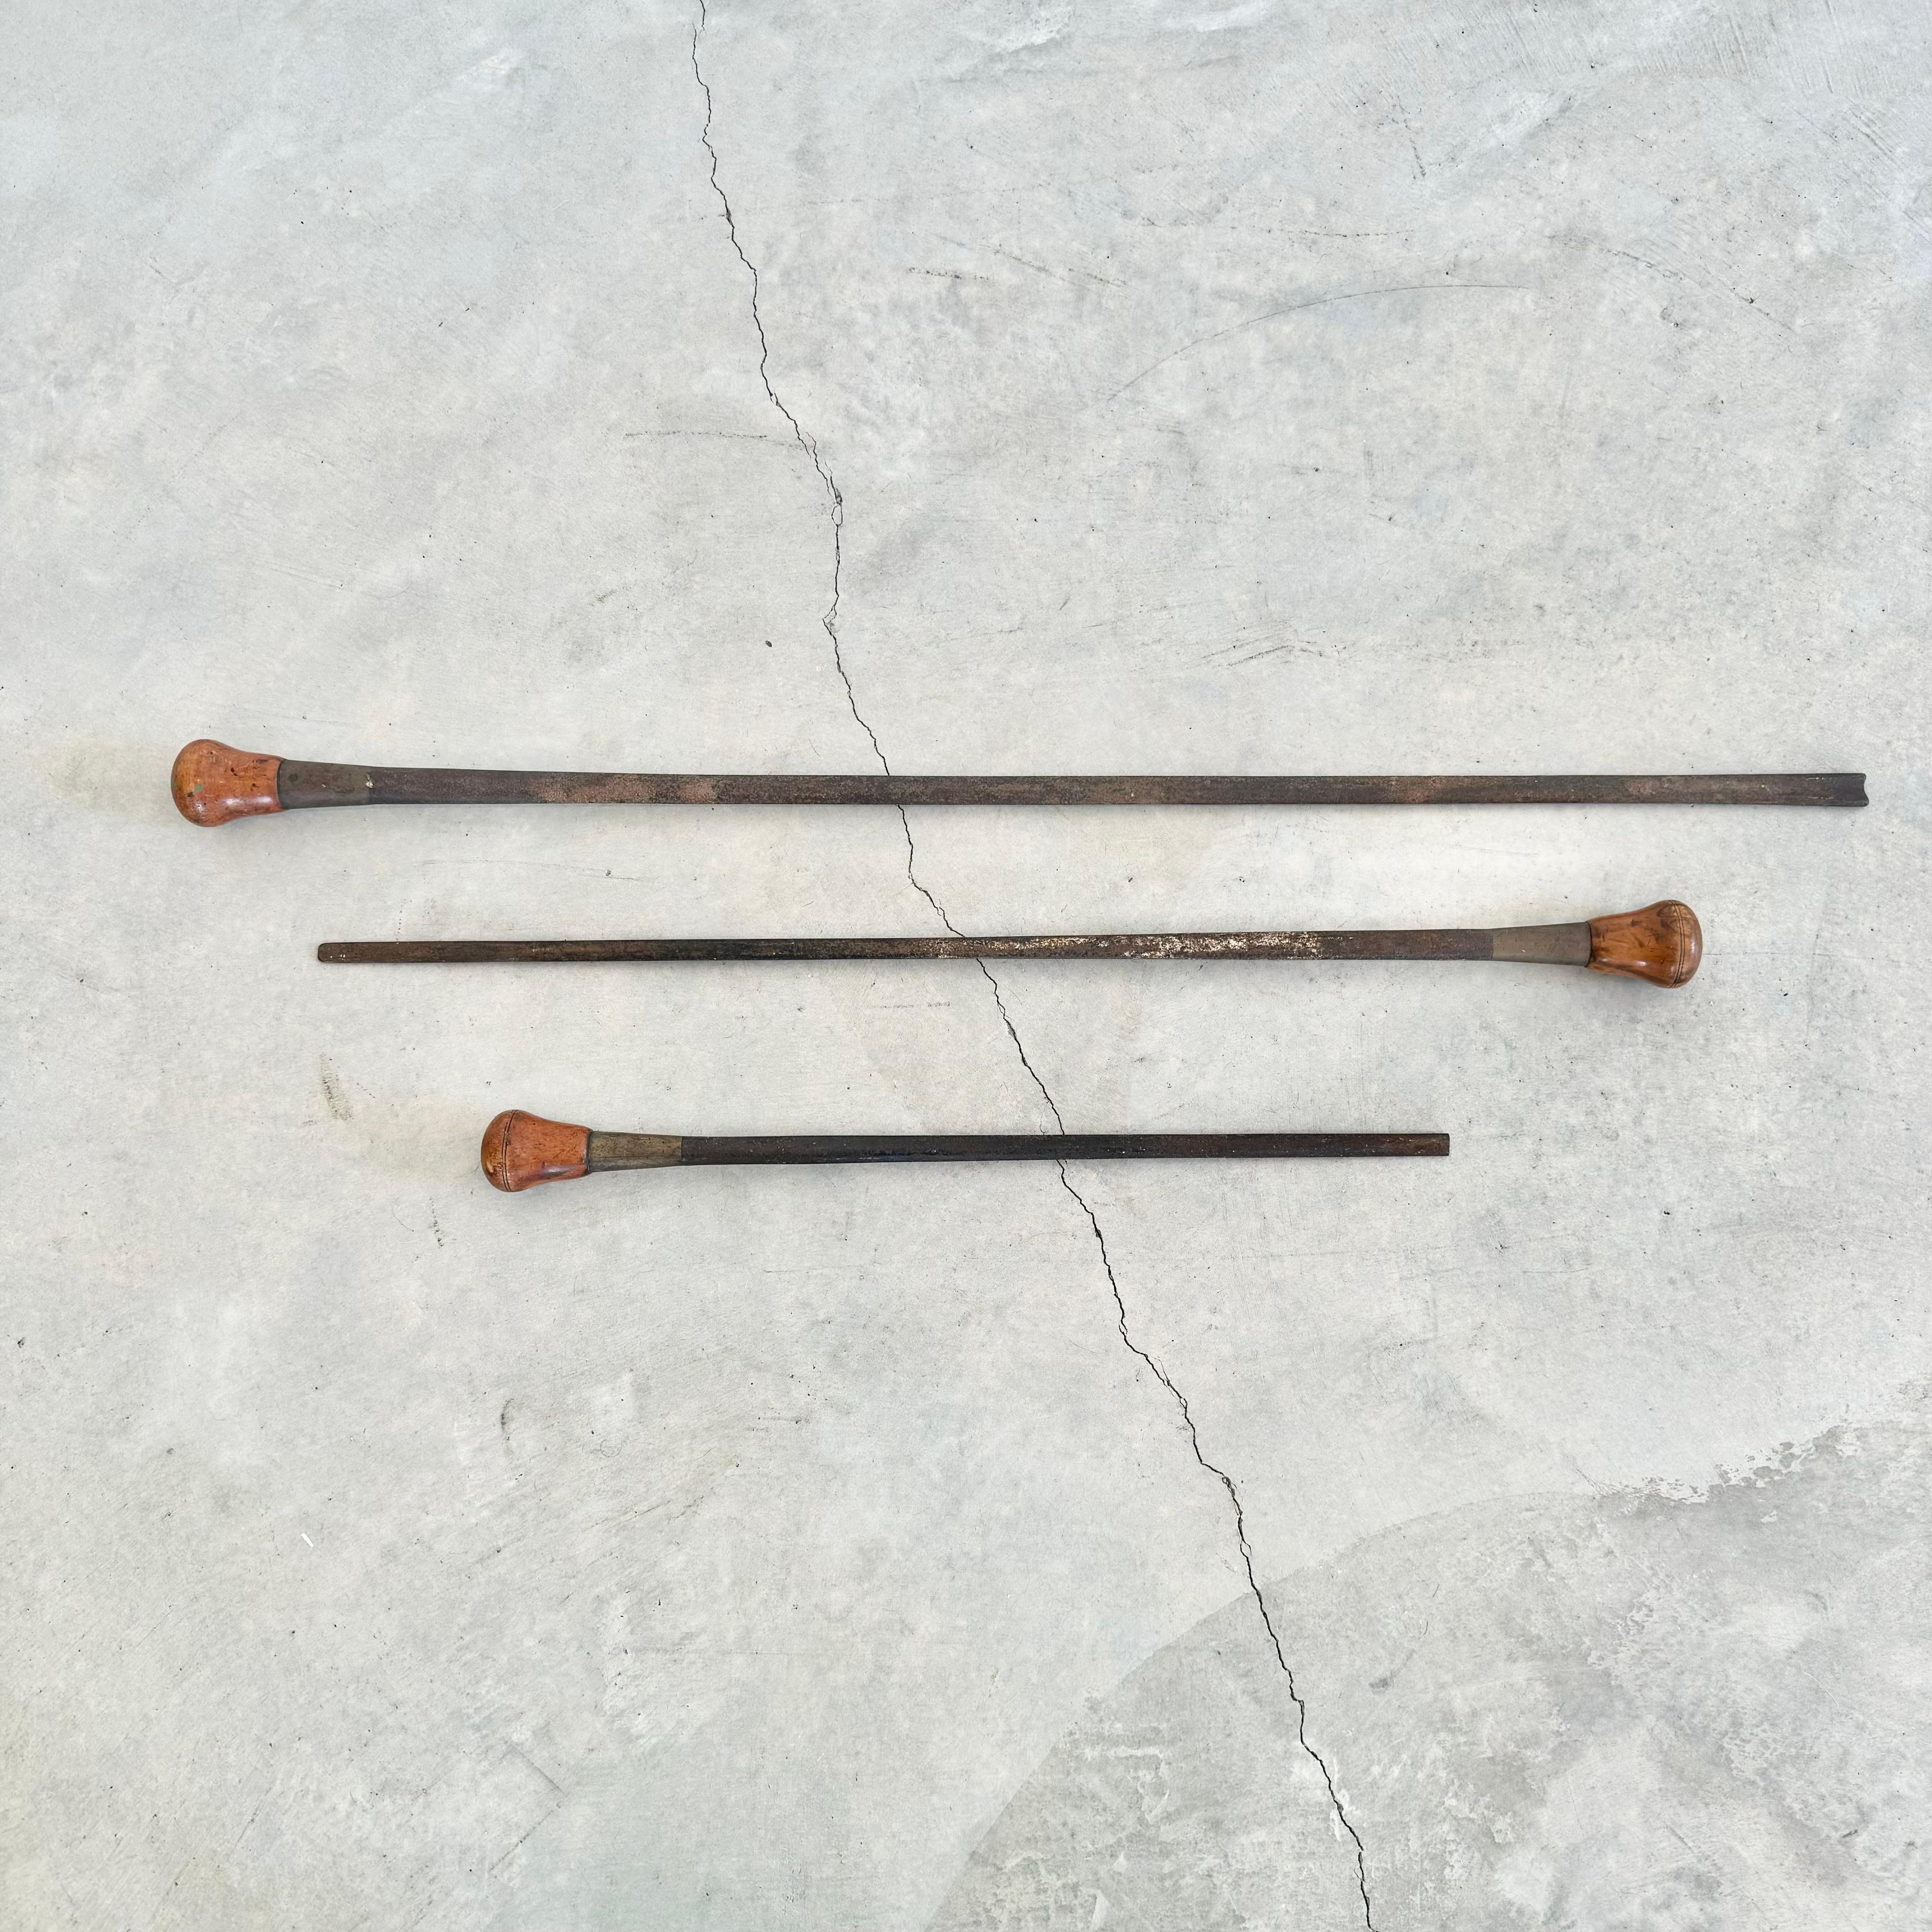 Amazing set of 3 wood working gouges and chisels. Numbered 2 (long), 3 (medium) and 4 (short). Maple pommel on each with a steel tang running through the handle. Each tool also has a brass chappe securing the handle to the steel rod. Beautiful heavy